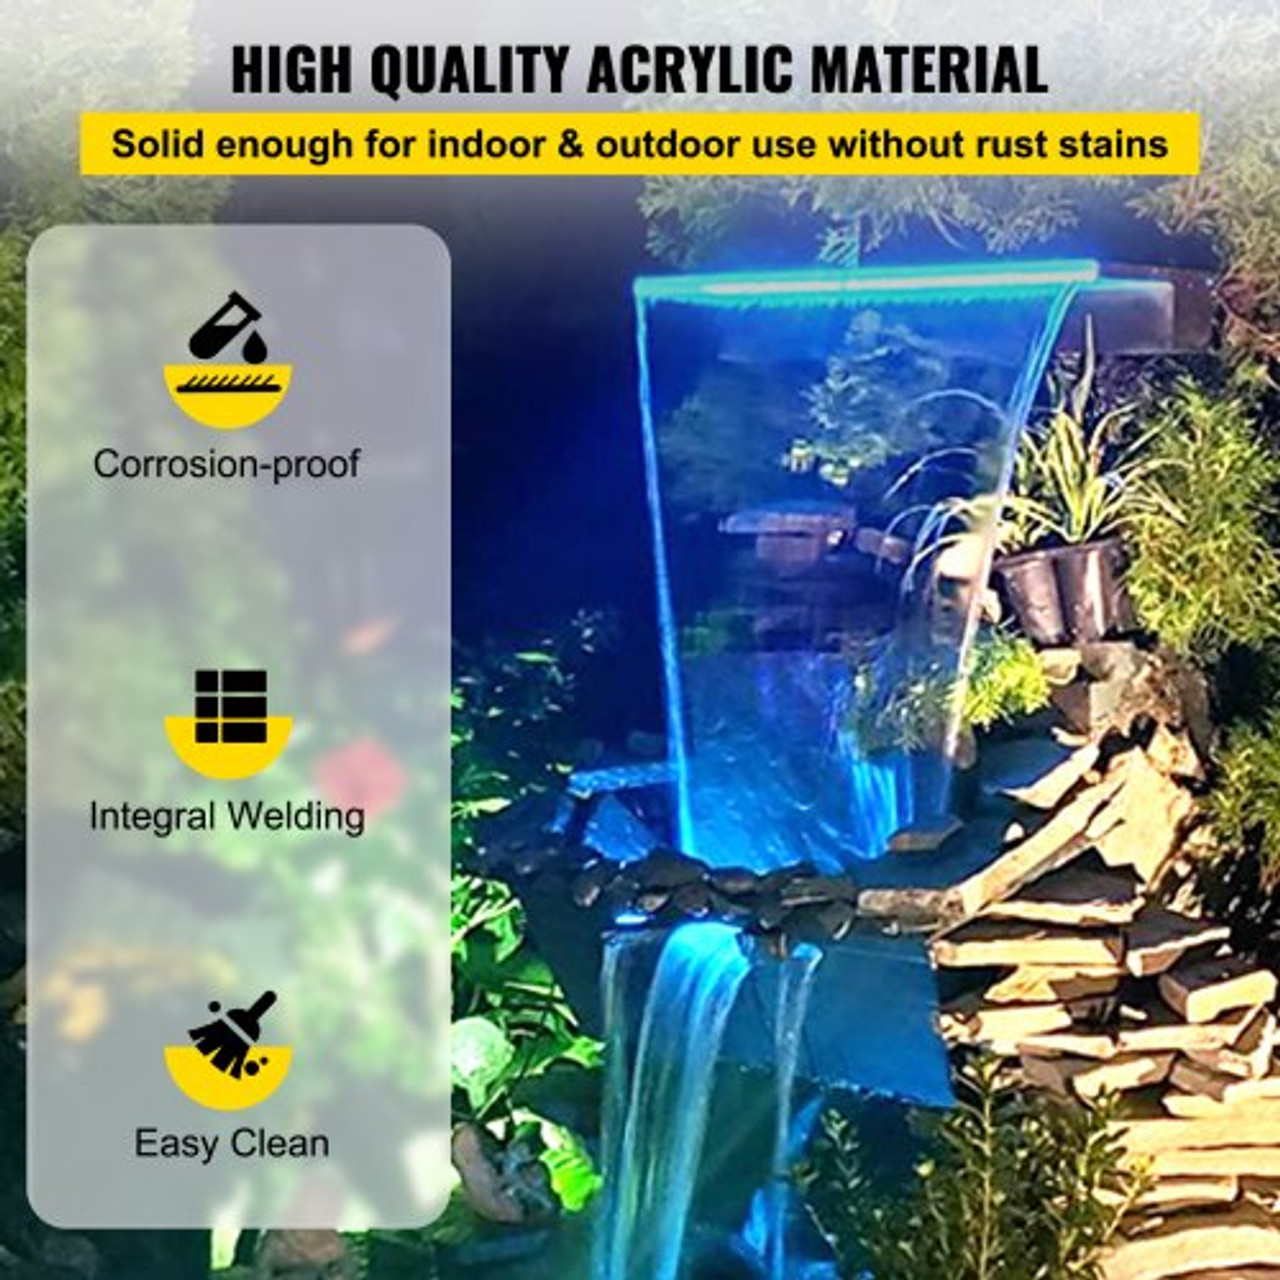 Fountain Spillway 35x3.2x8.1 Inch, Pool Waterfall Fountain 17 Colors Led, Pool Water Fall Kit with Remote, Pool Spillway Solid Acrylic Pool Waterfall for Garden Pond, Swimming Pool, Square